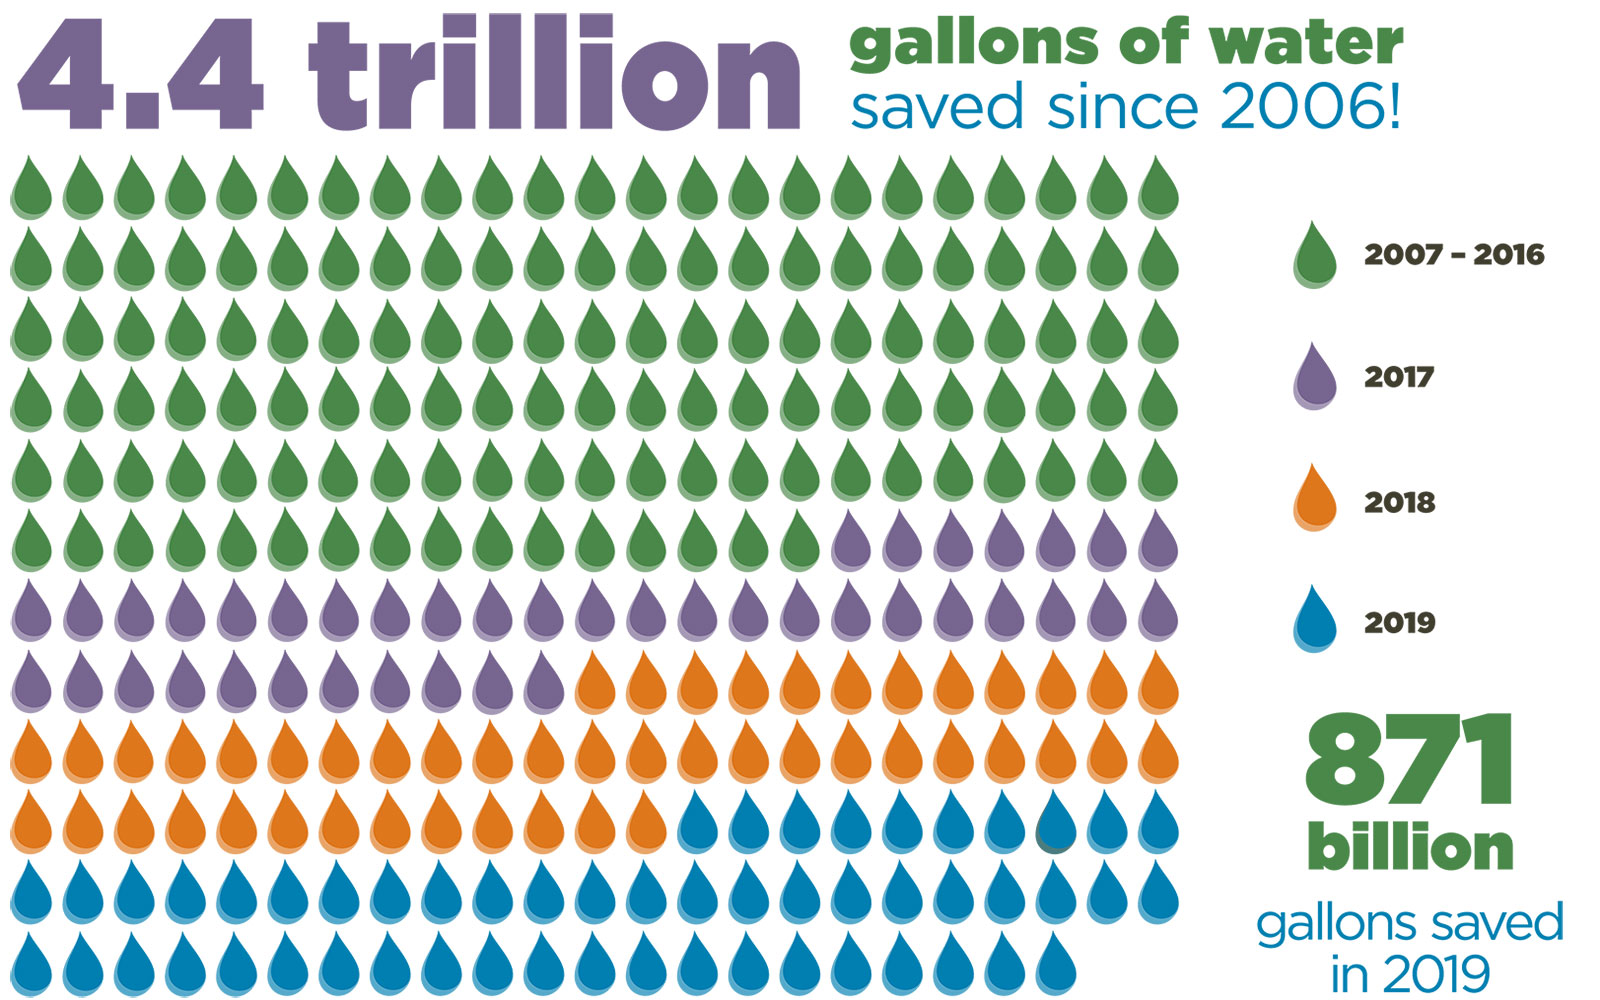 4.4 trillion gallons of water saved from 2007 to 2019